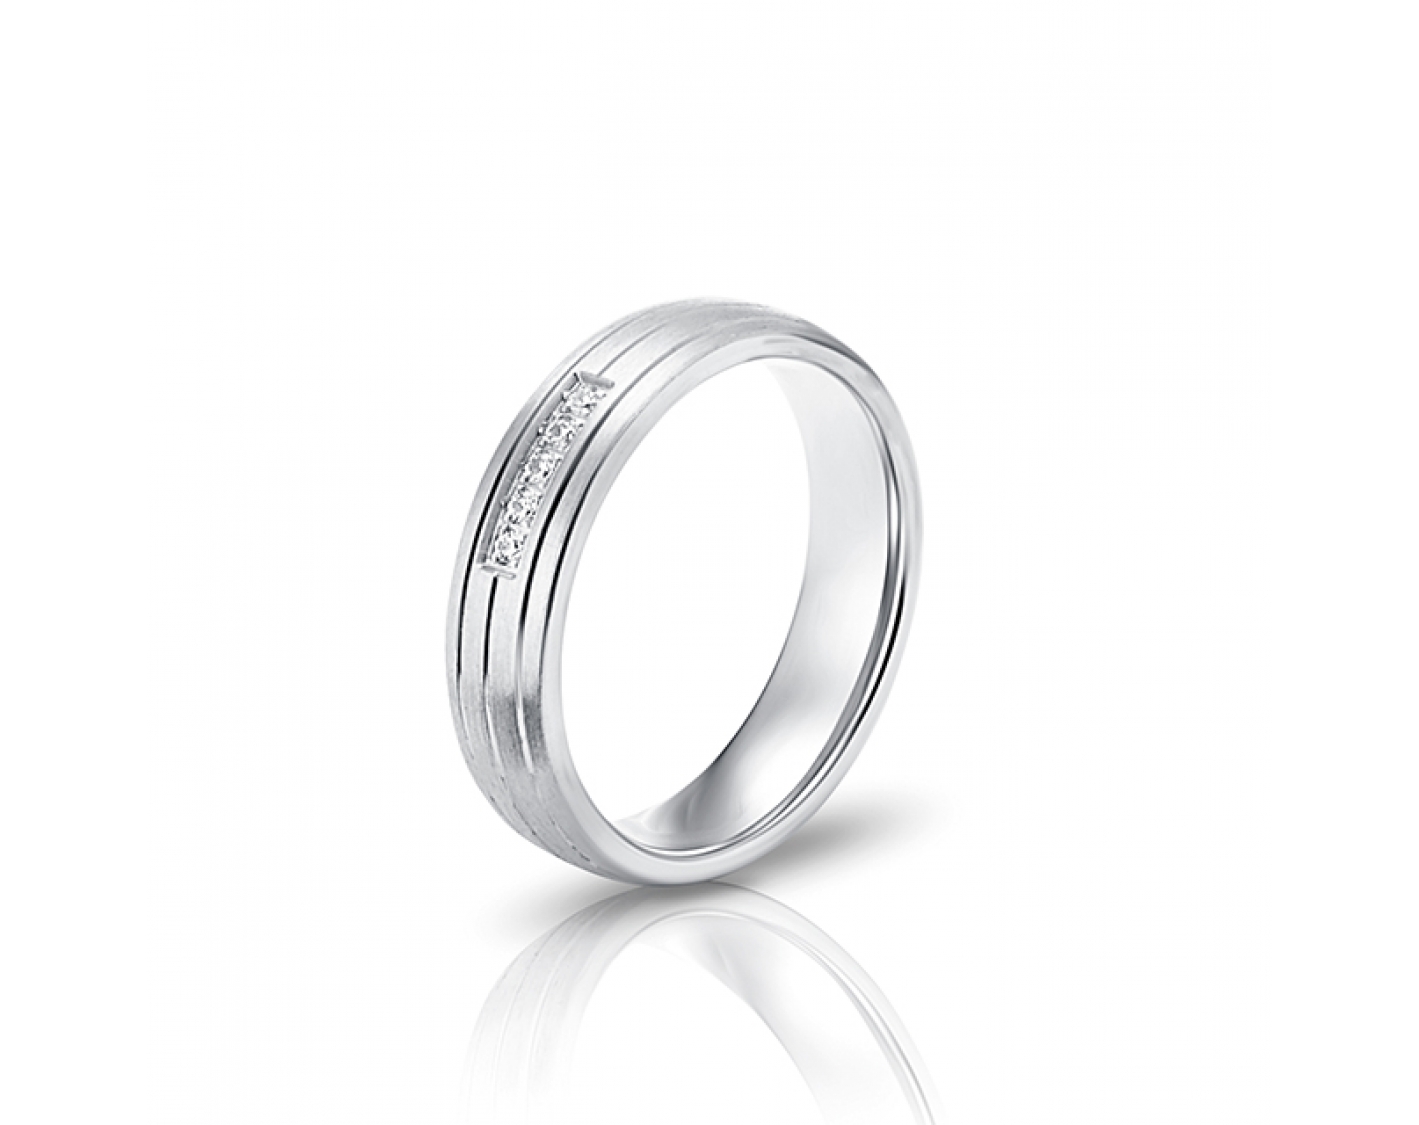 18k white gold 5mm matte wedding band with shiny inlays and diamonds